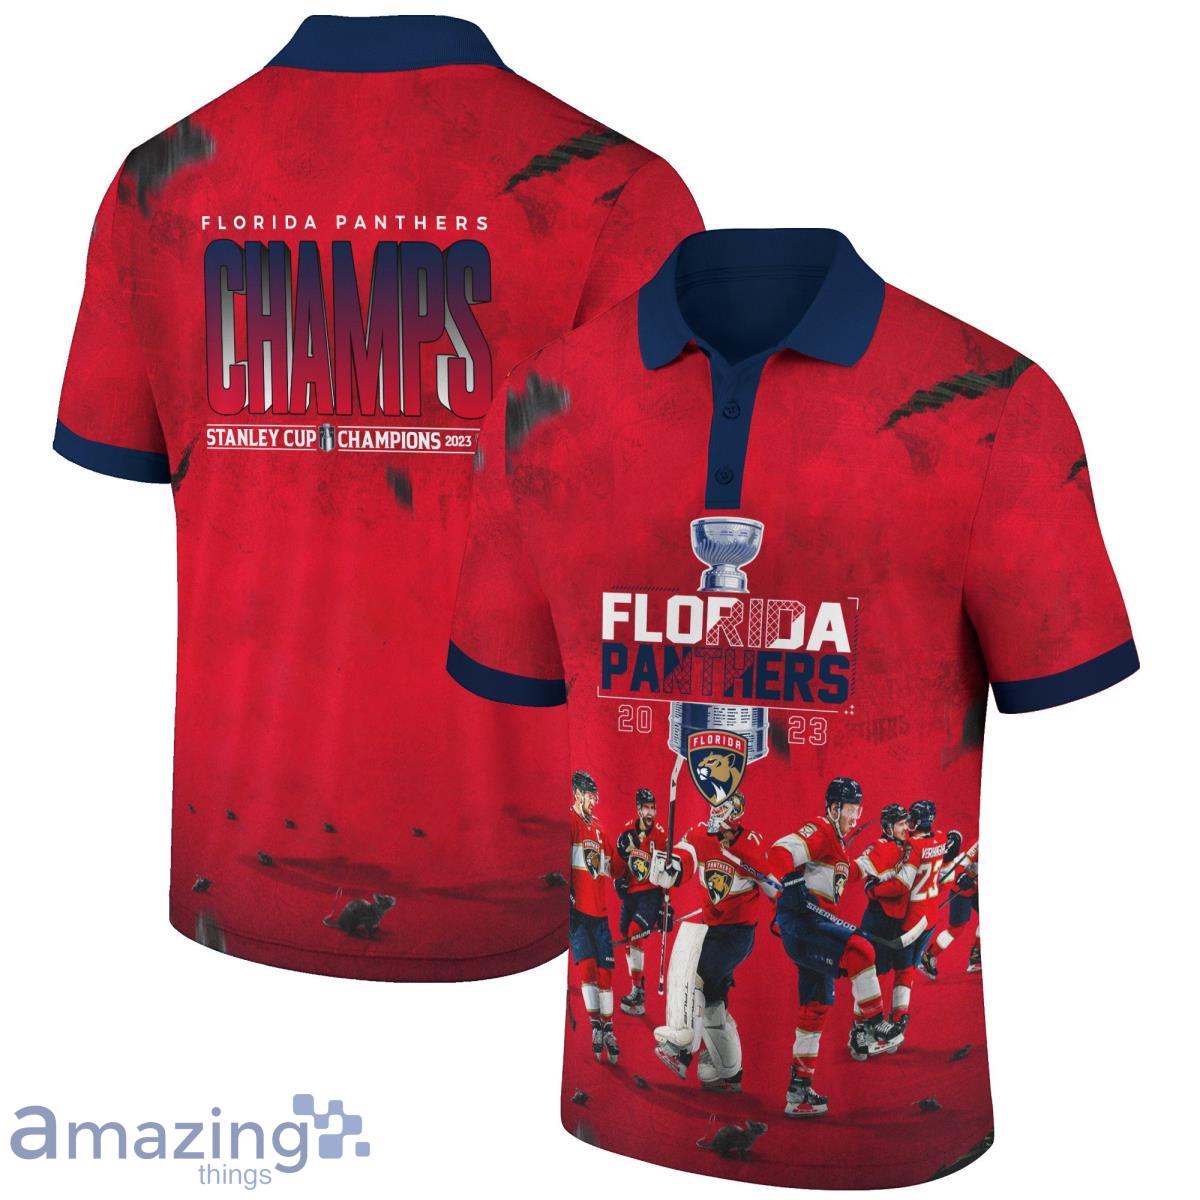 Florida Panthers National Hockey League Champions 2023 On Red Background 3D Polo Shirt Product Photo 1